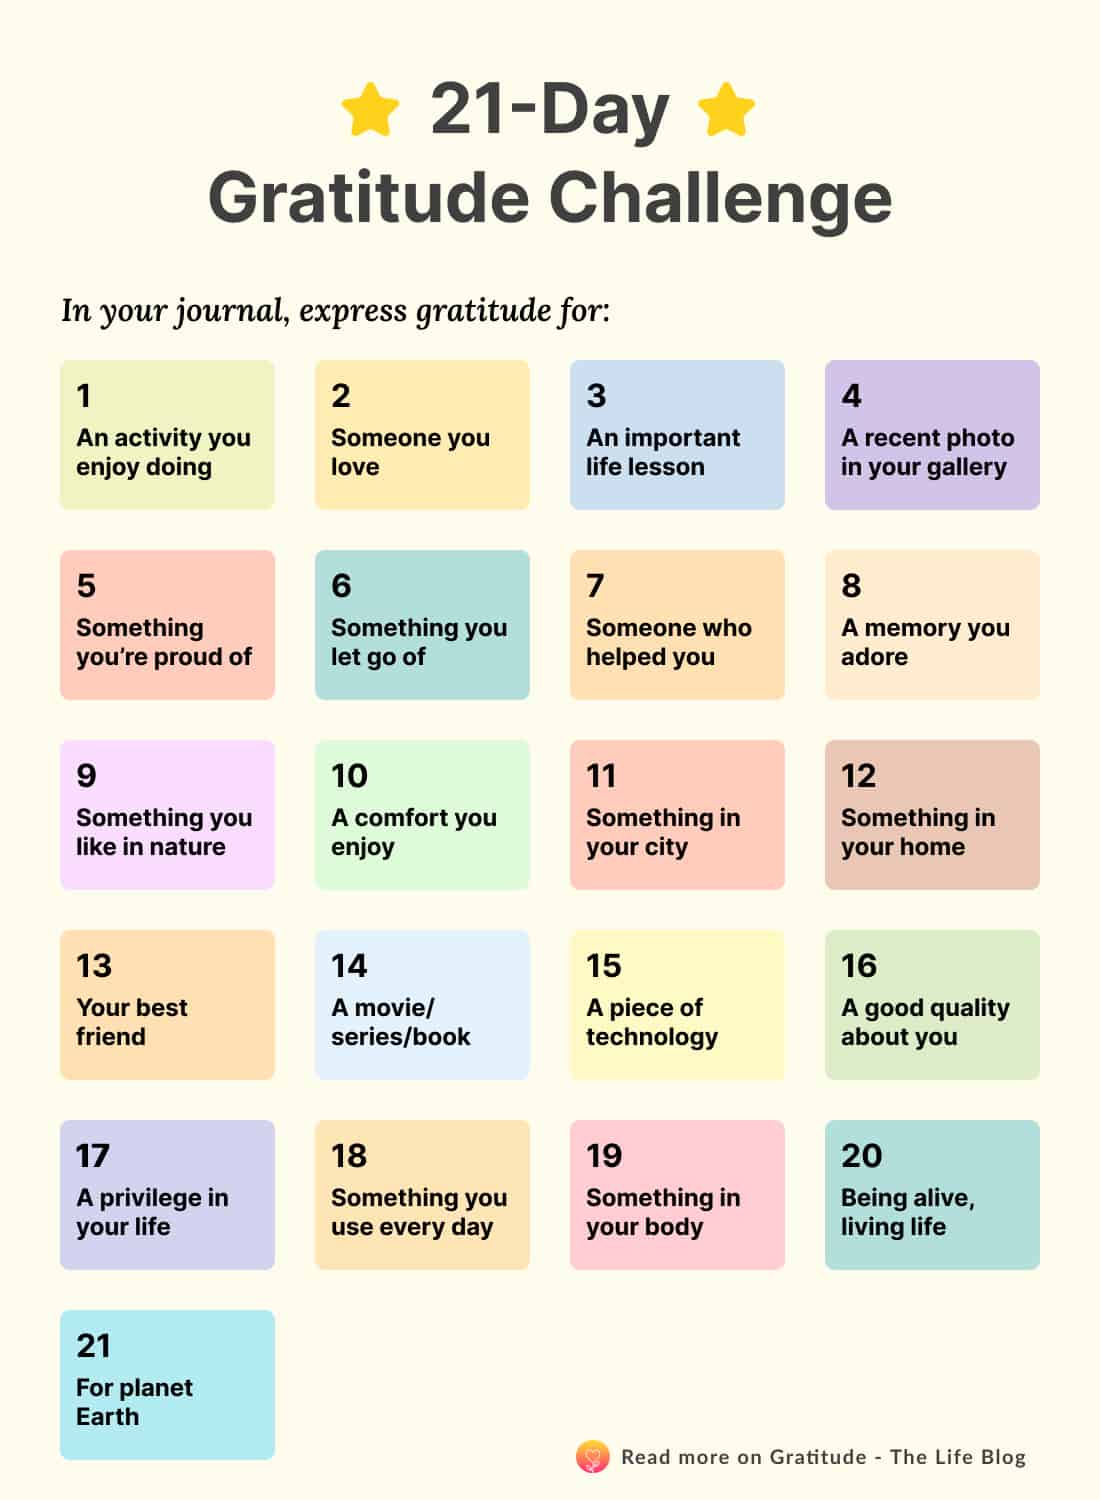 21-Day Gratitude Challenge to Build the Habit of Being Grateful